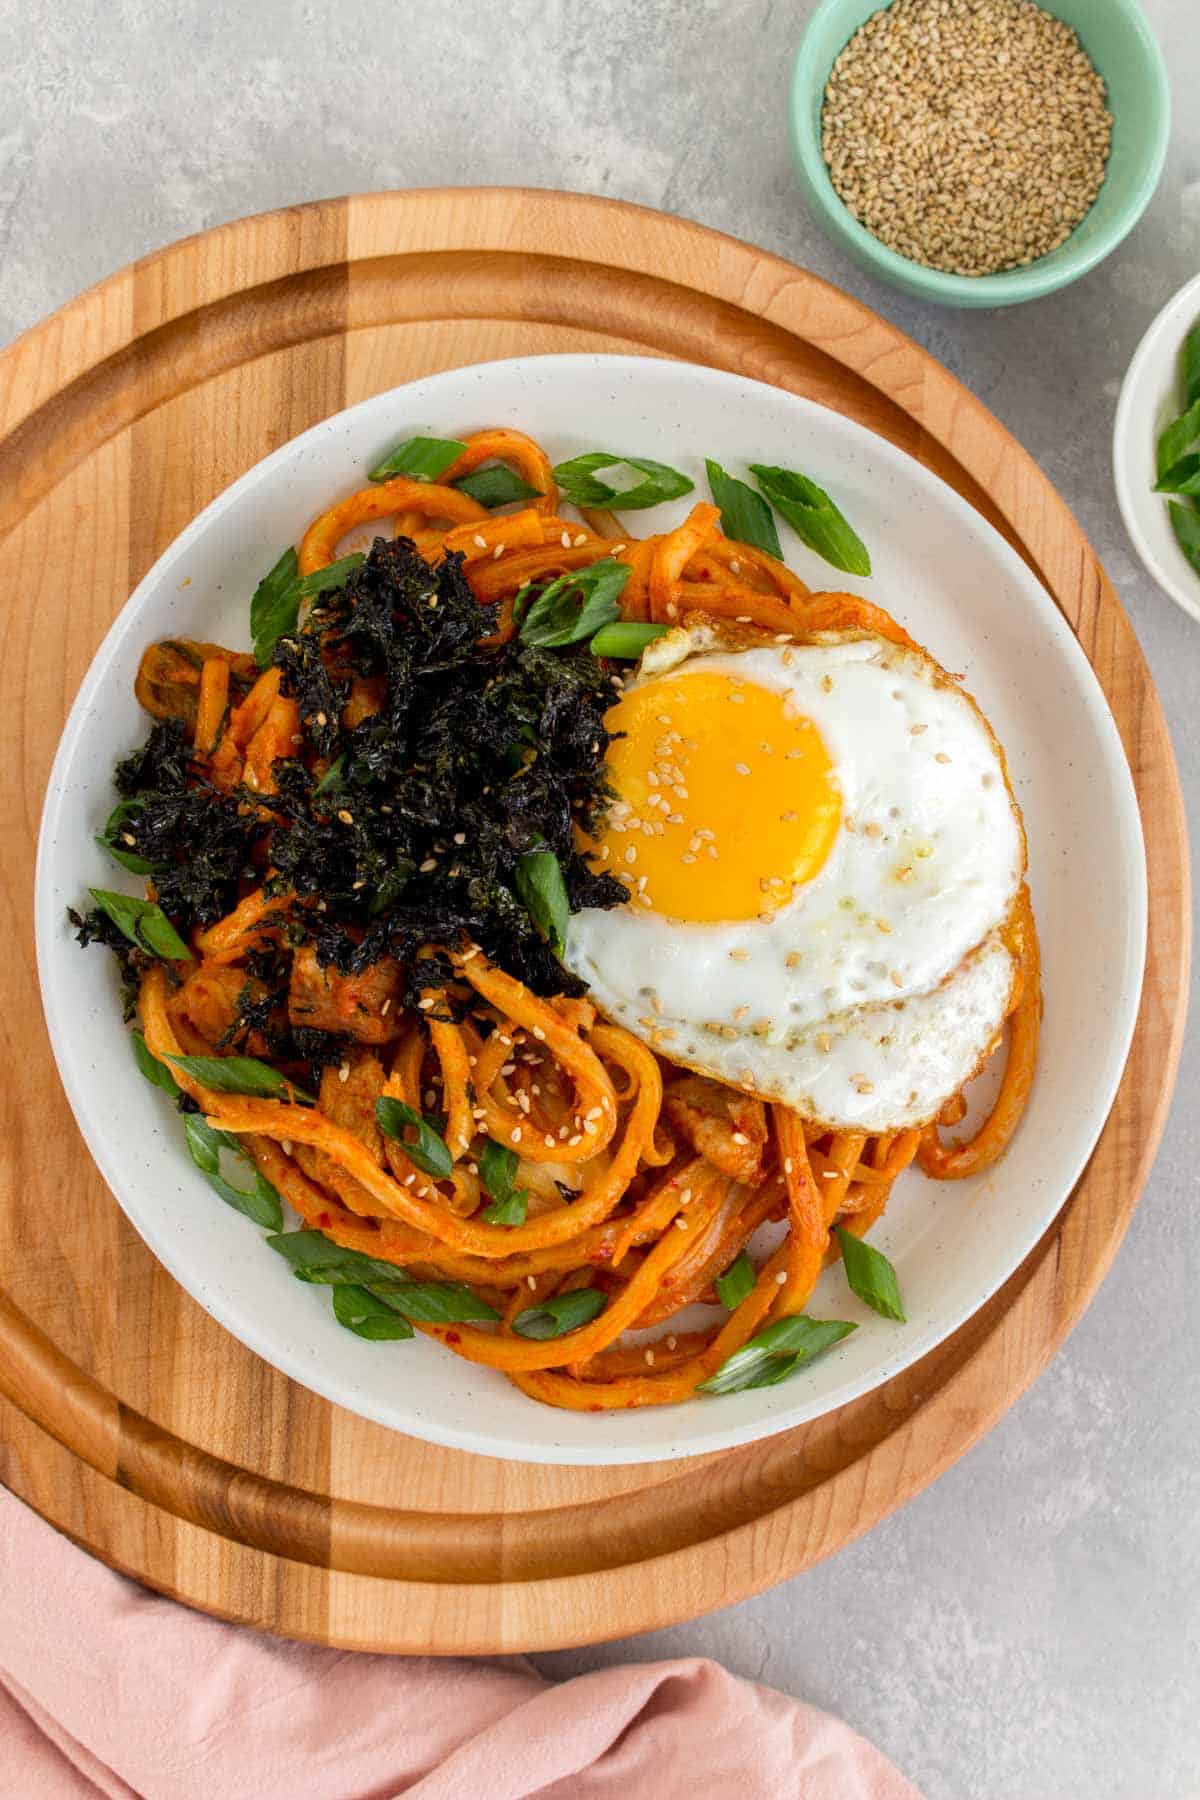 Overhead view of a plate of kimchi udon with a fried egg and seaweed on top.